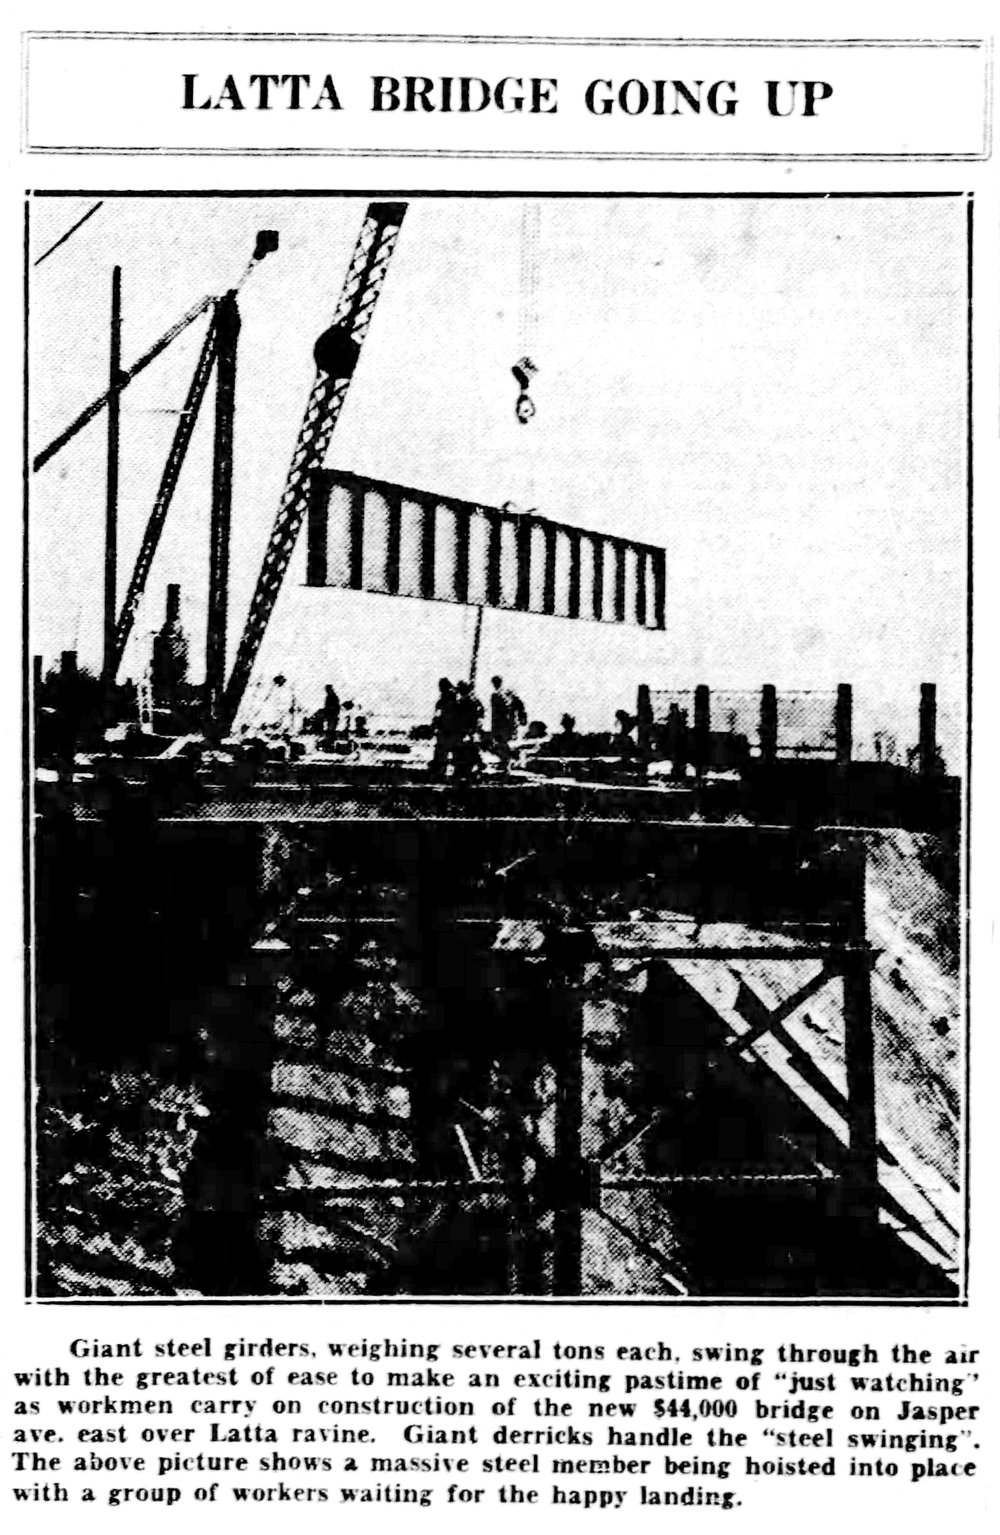  Crews errect the Bridge’s deck in this May 1936 photograph.   Edmonton Journal, May 5th, 1936.  